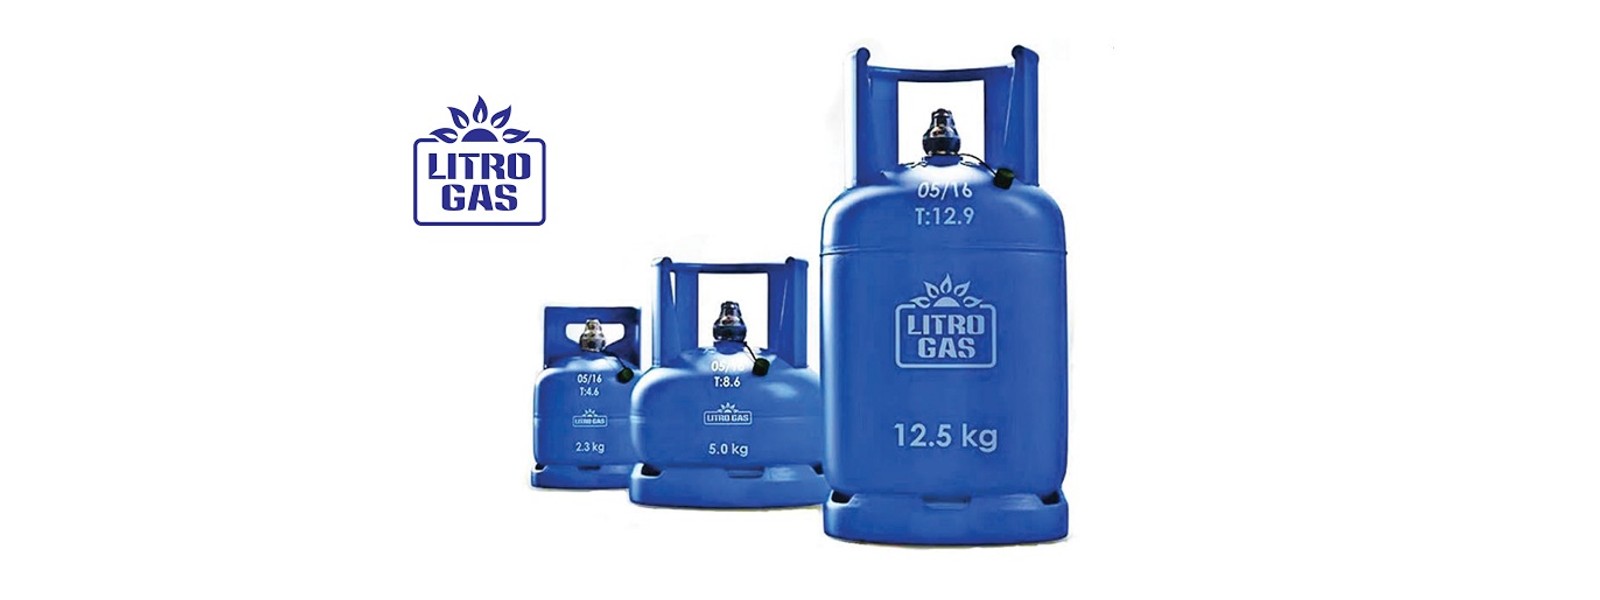 Over 500,000 Gas Cylinders distributed – Litro